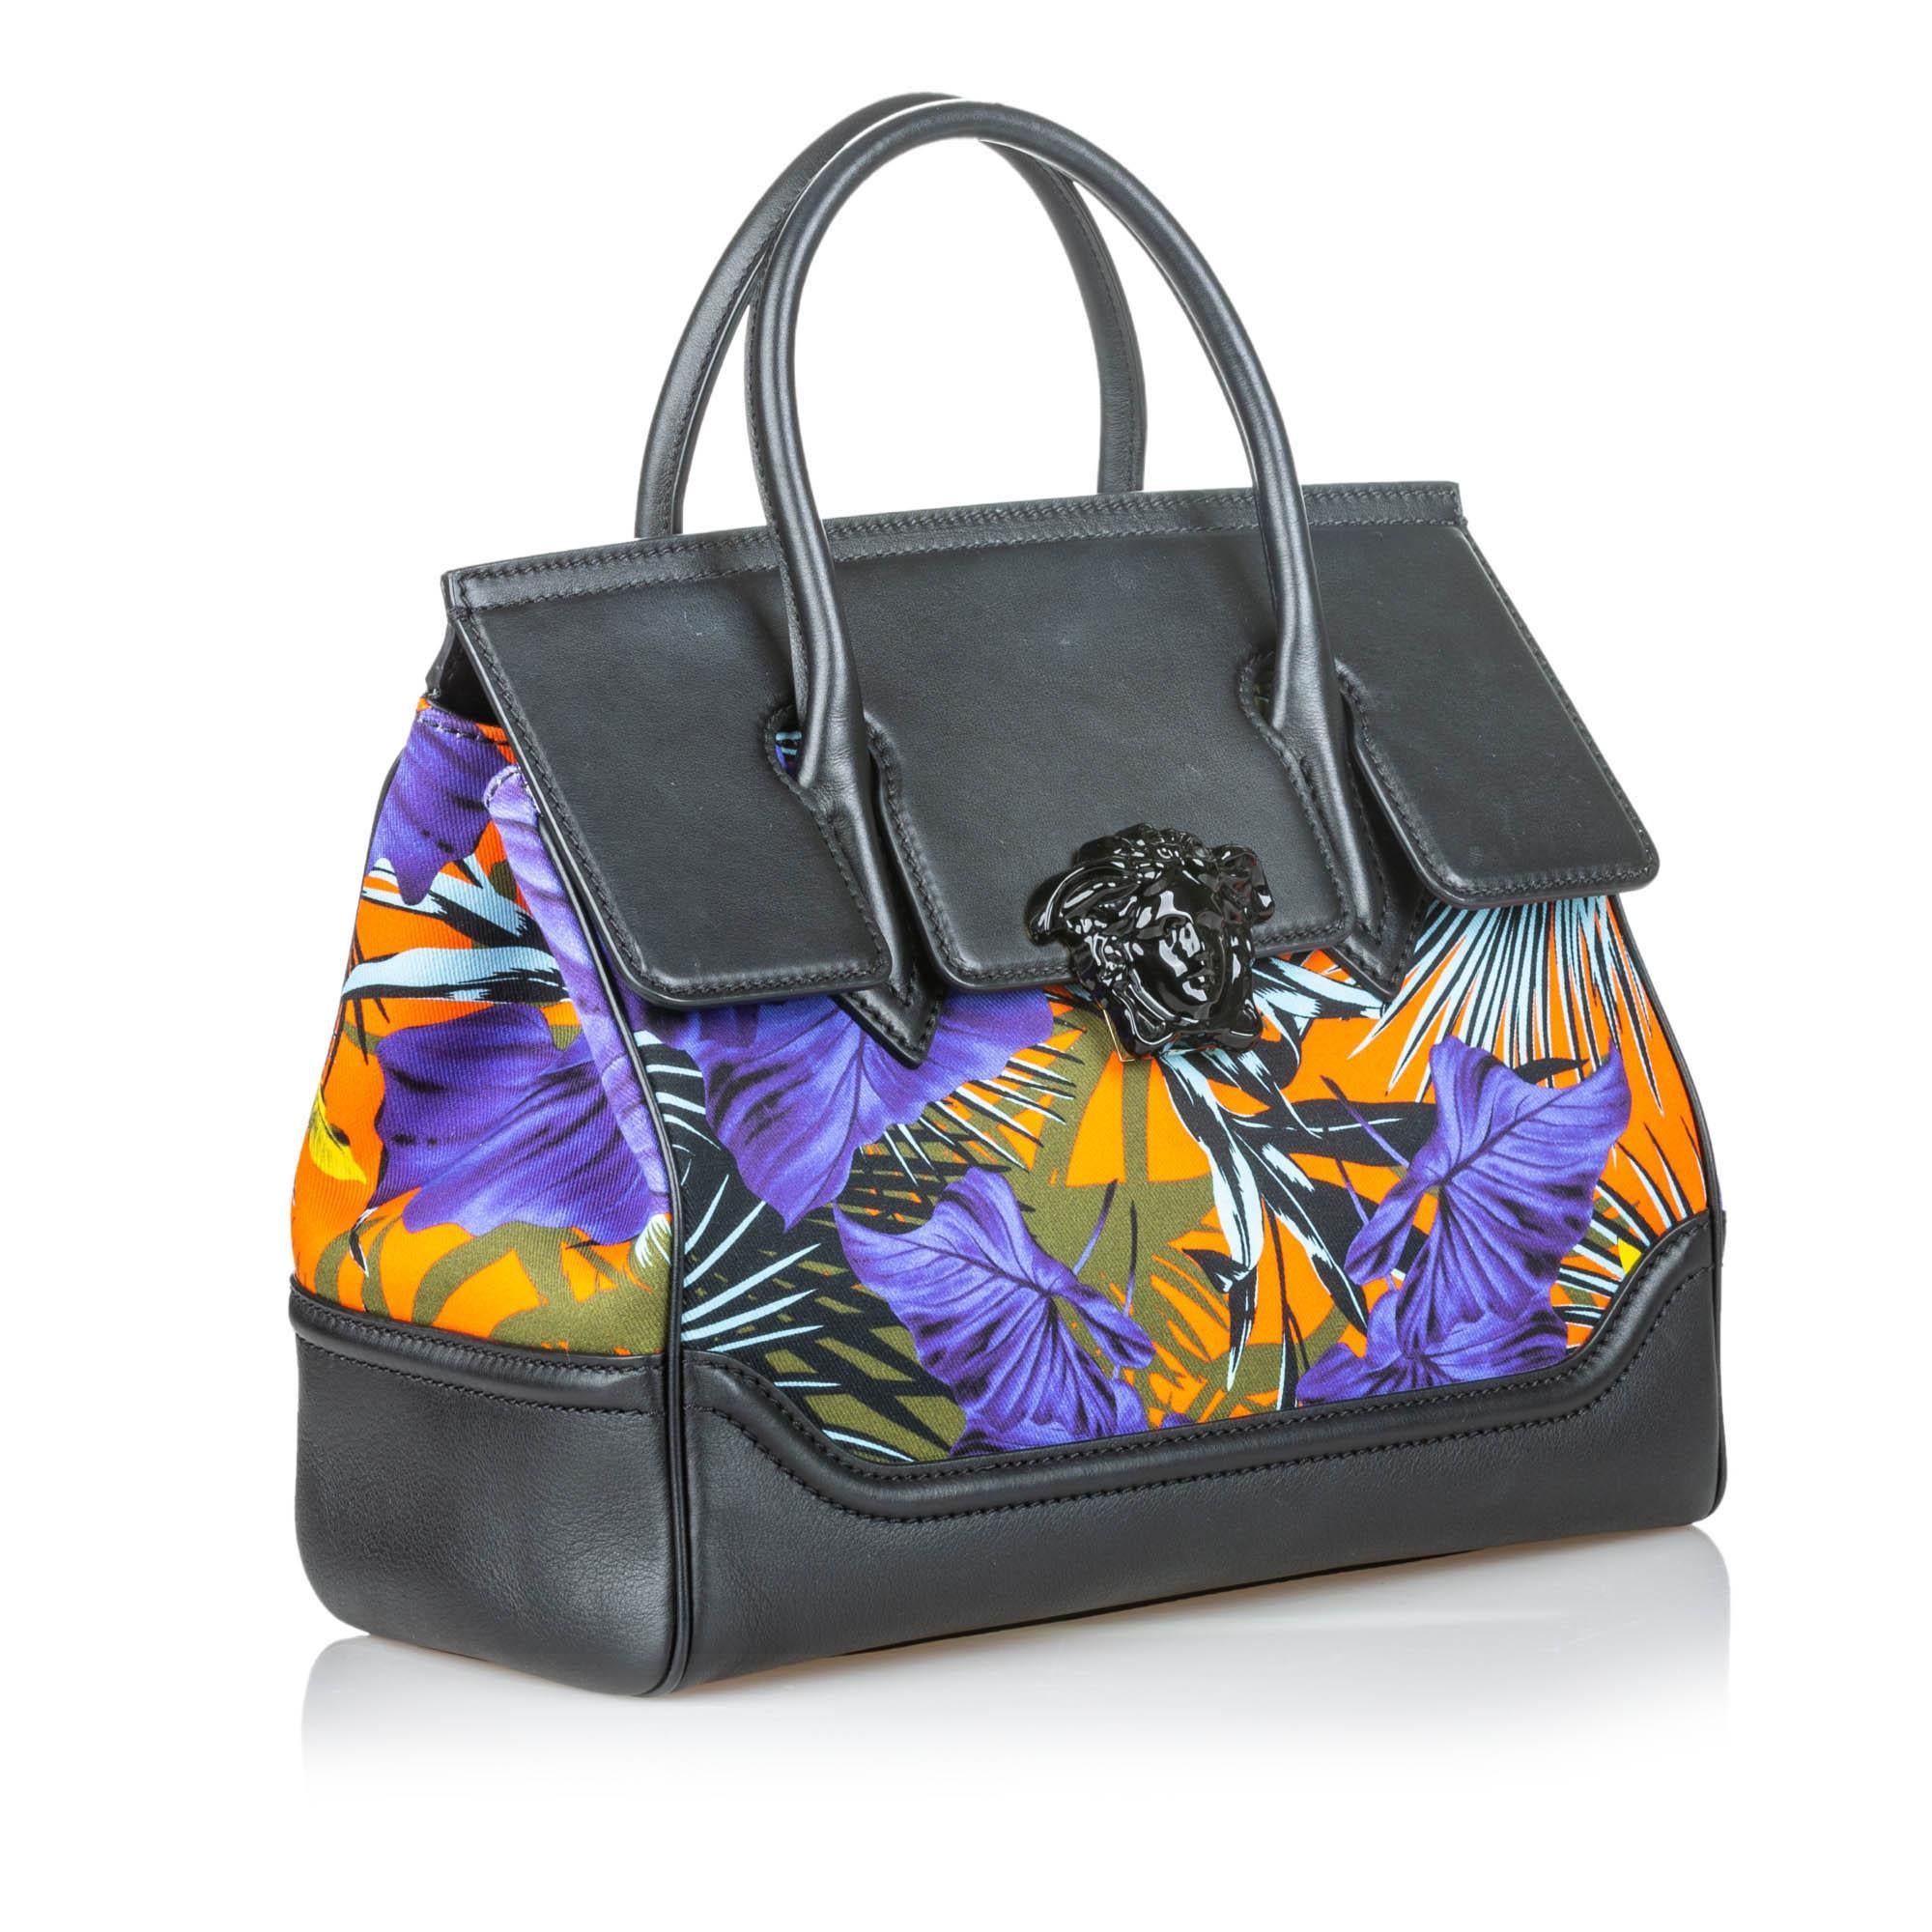 Versace Printed Canvas Palazzo Empire Satchel

The Palazzo Empire Satchel features a printed canvas body with leather trim, an adjustable flat leather strap, rolled leather handles, a front flap with a metal closure, and interior zip and slip